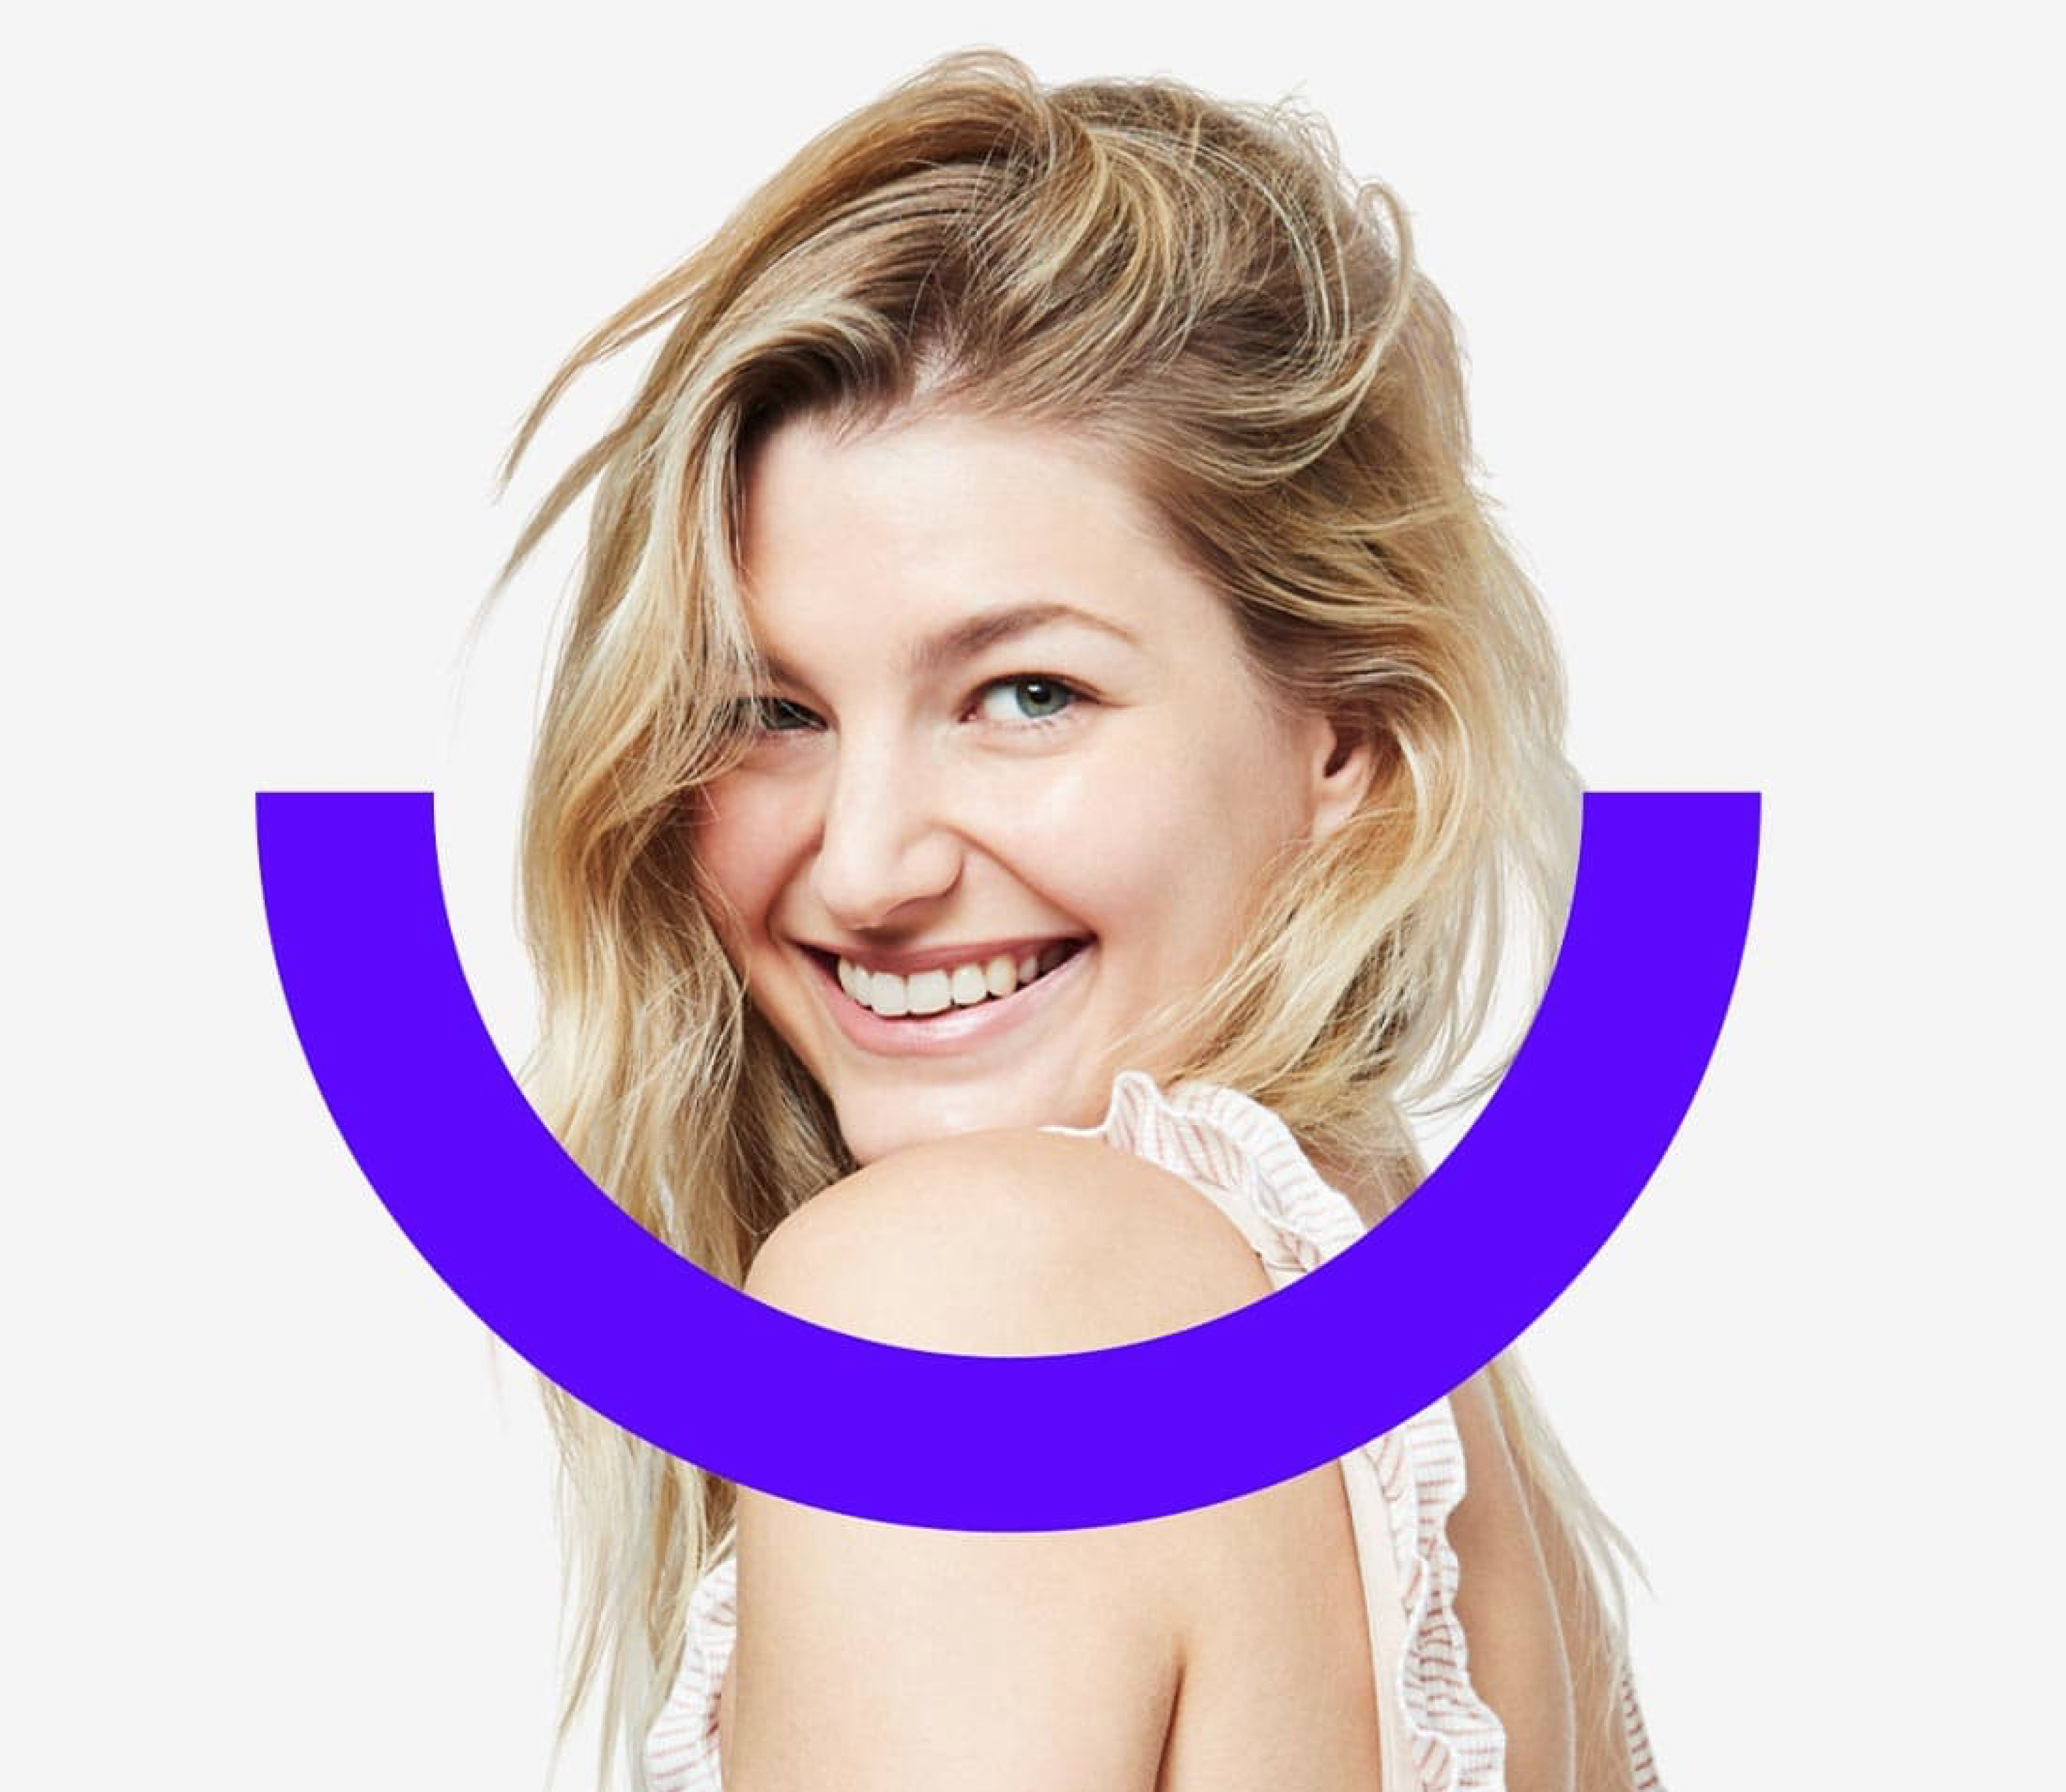 Smiling blonde woman on white blouse looking sideway with blurple semi circle in front